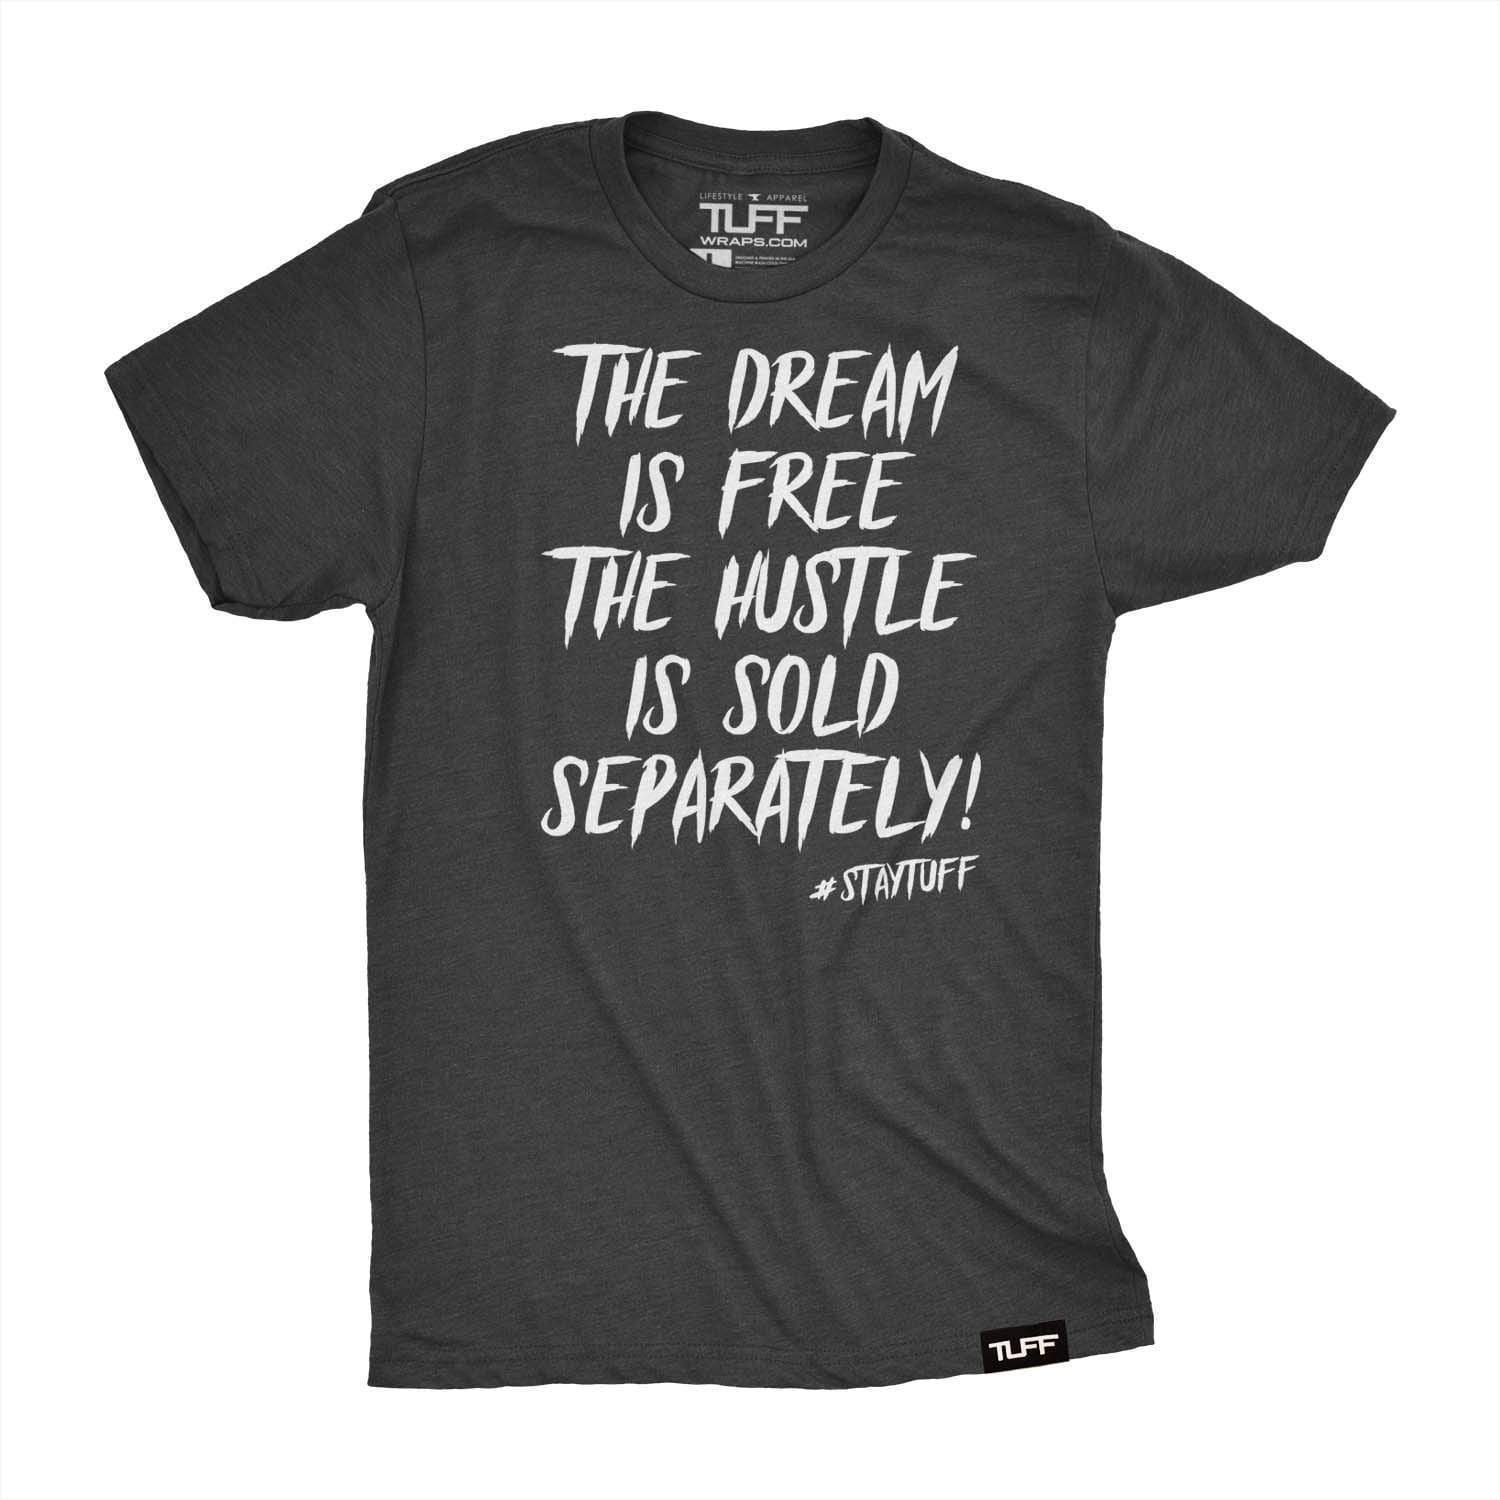 The Dream Is Free The Hustle Is Sold Separately Tee S / Black TuffWraps.com